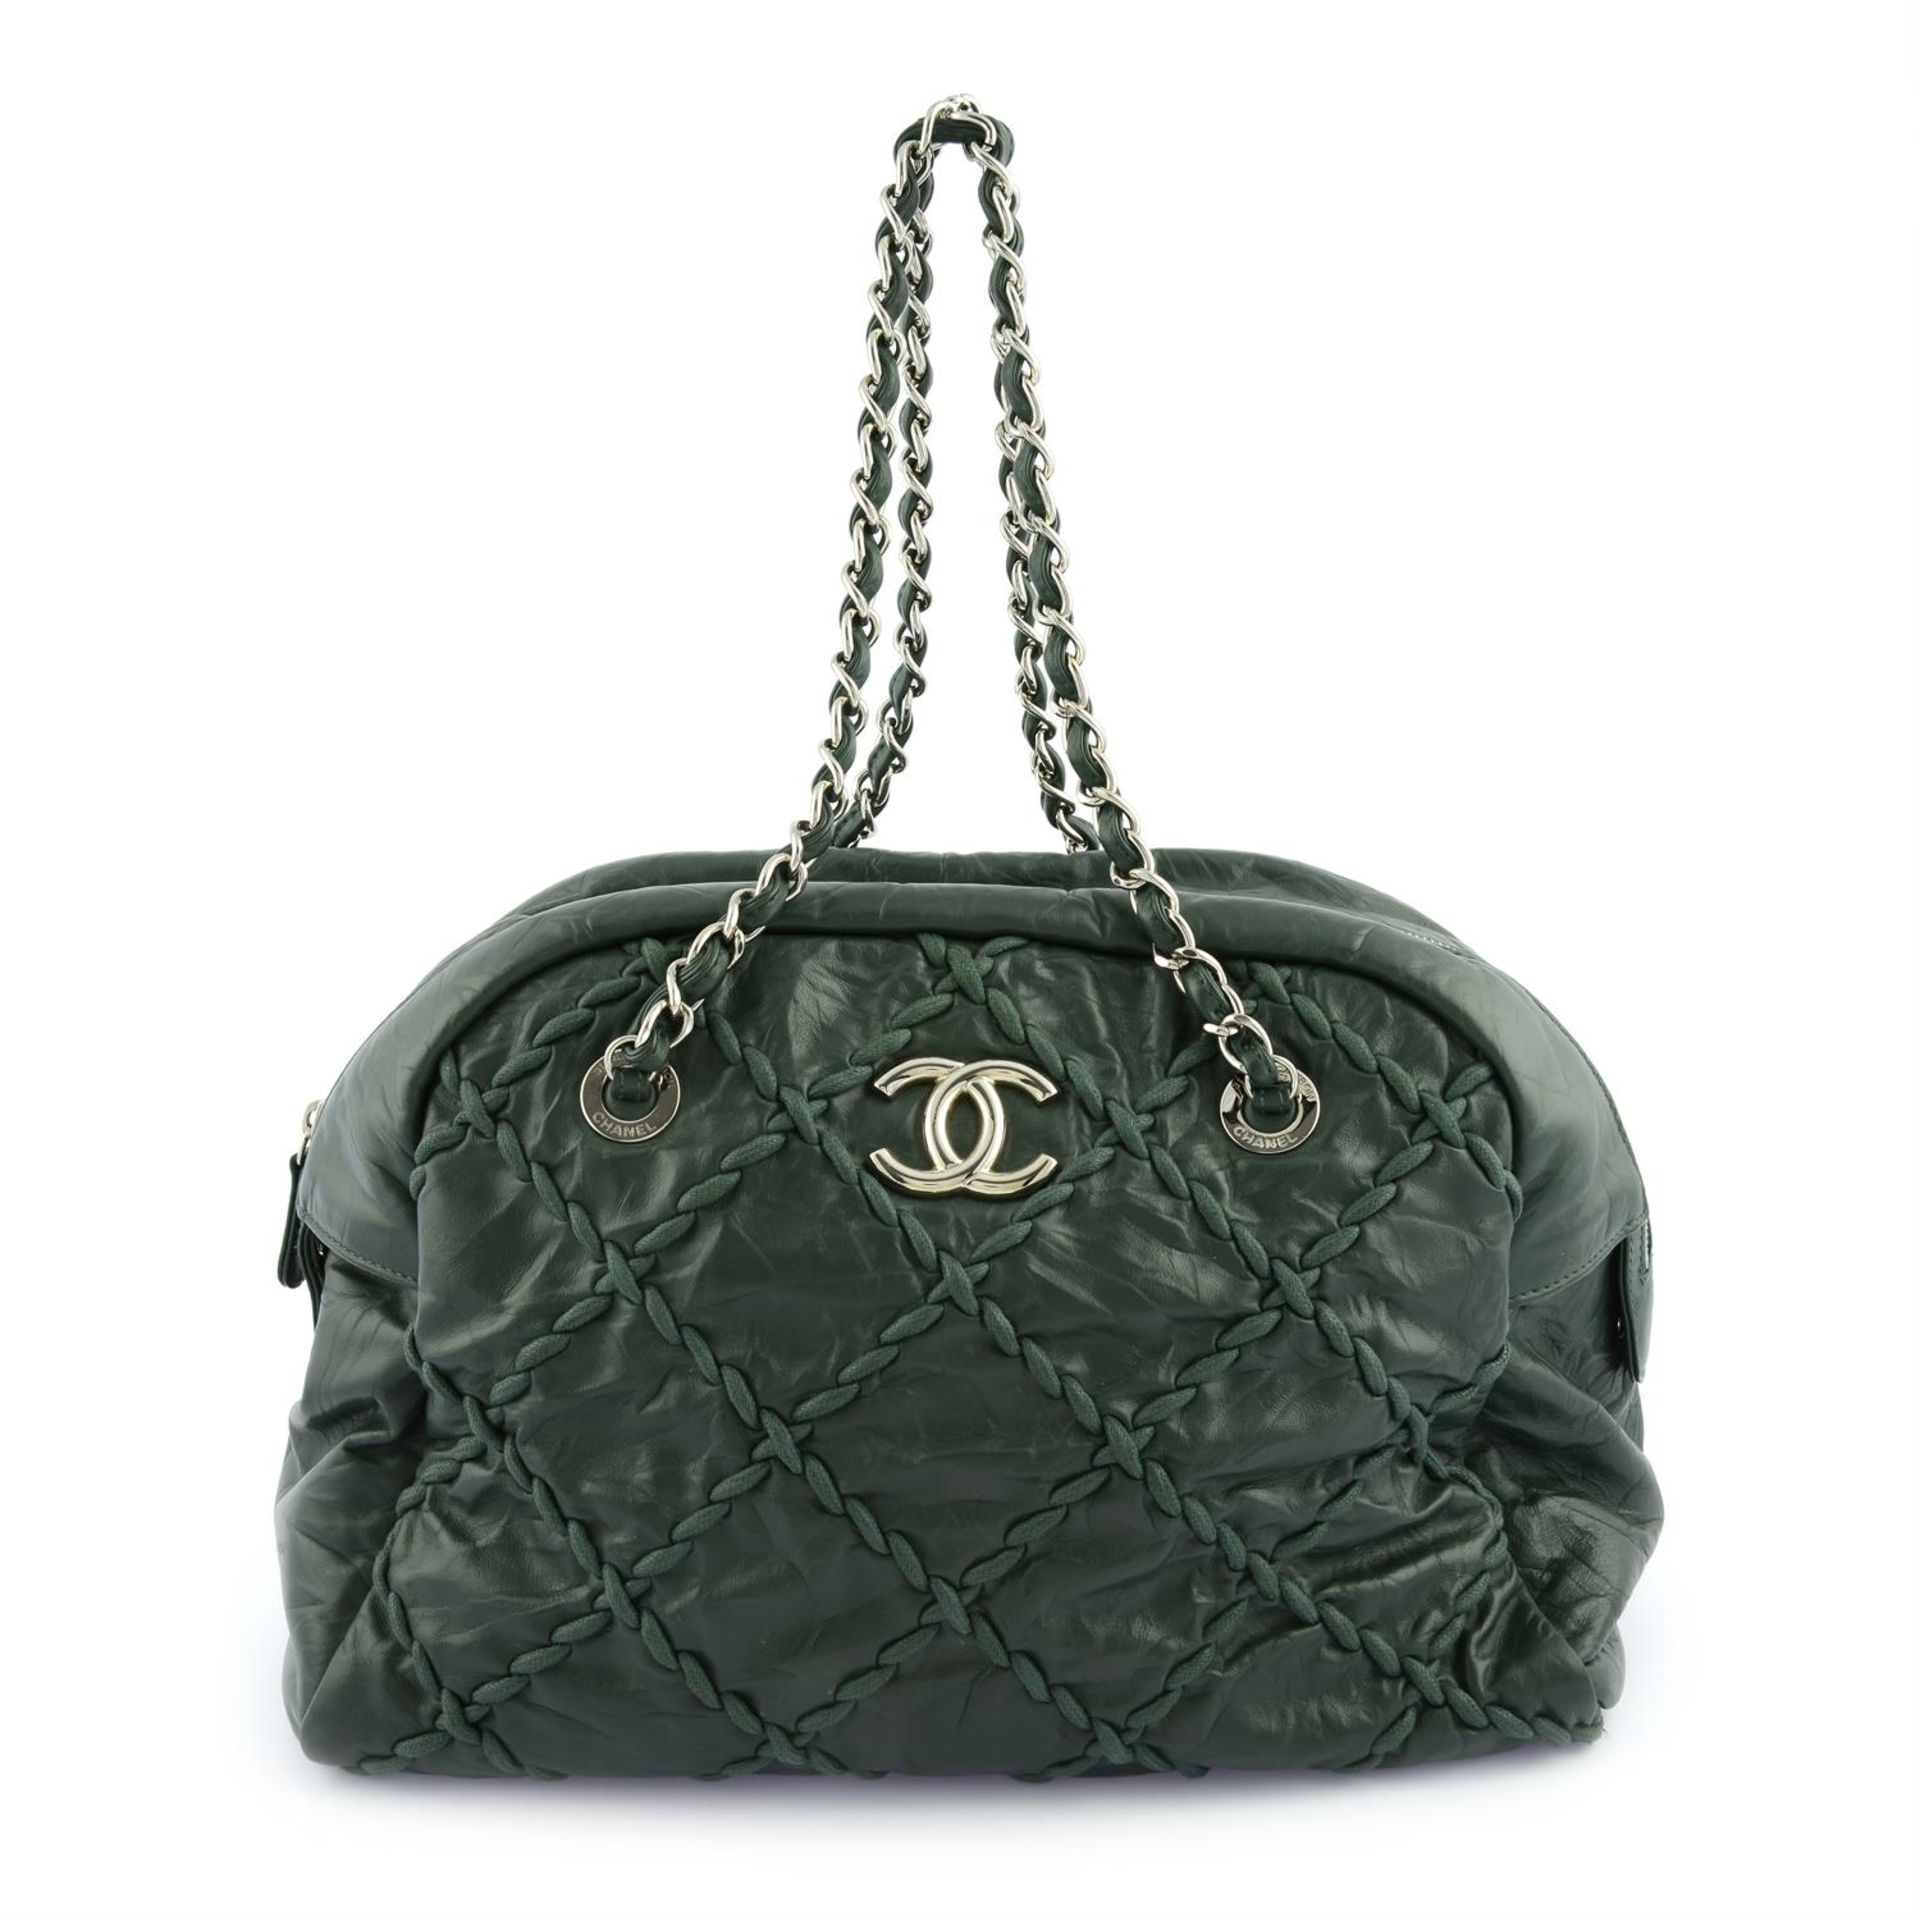 CHANEL - a green crinkled leather Ultra stitch bowling bag.